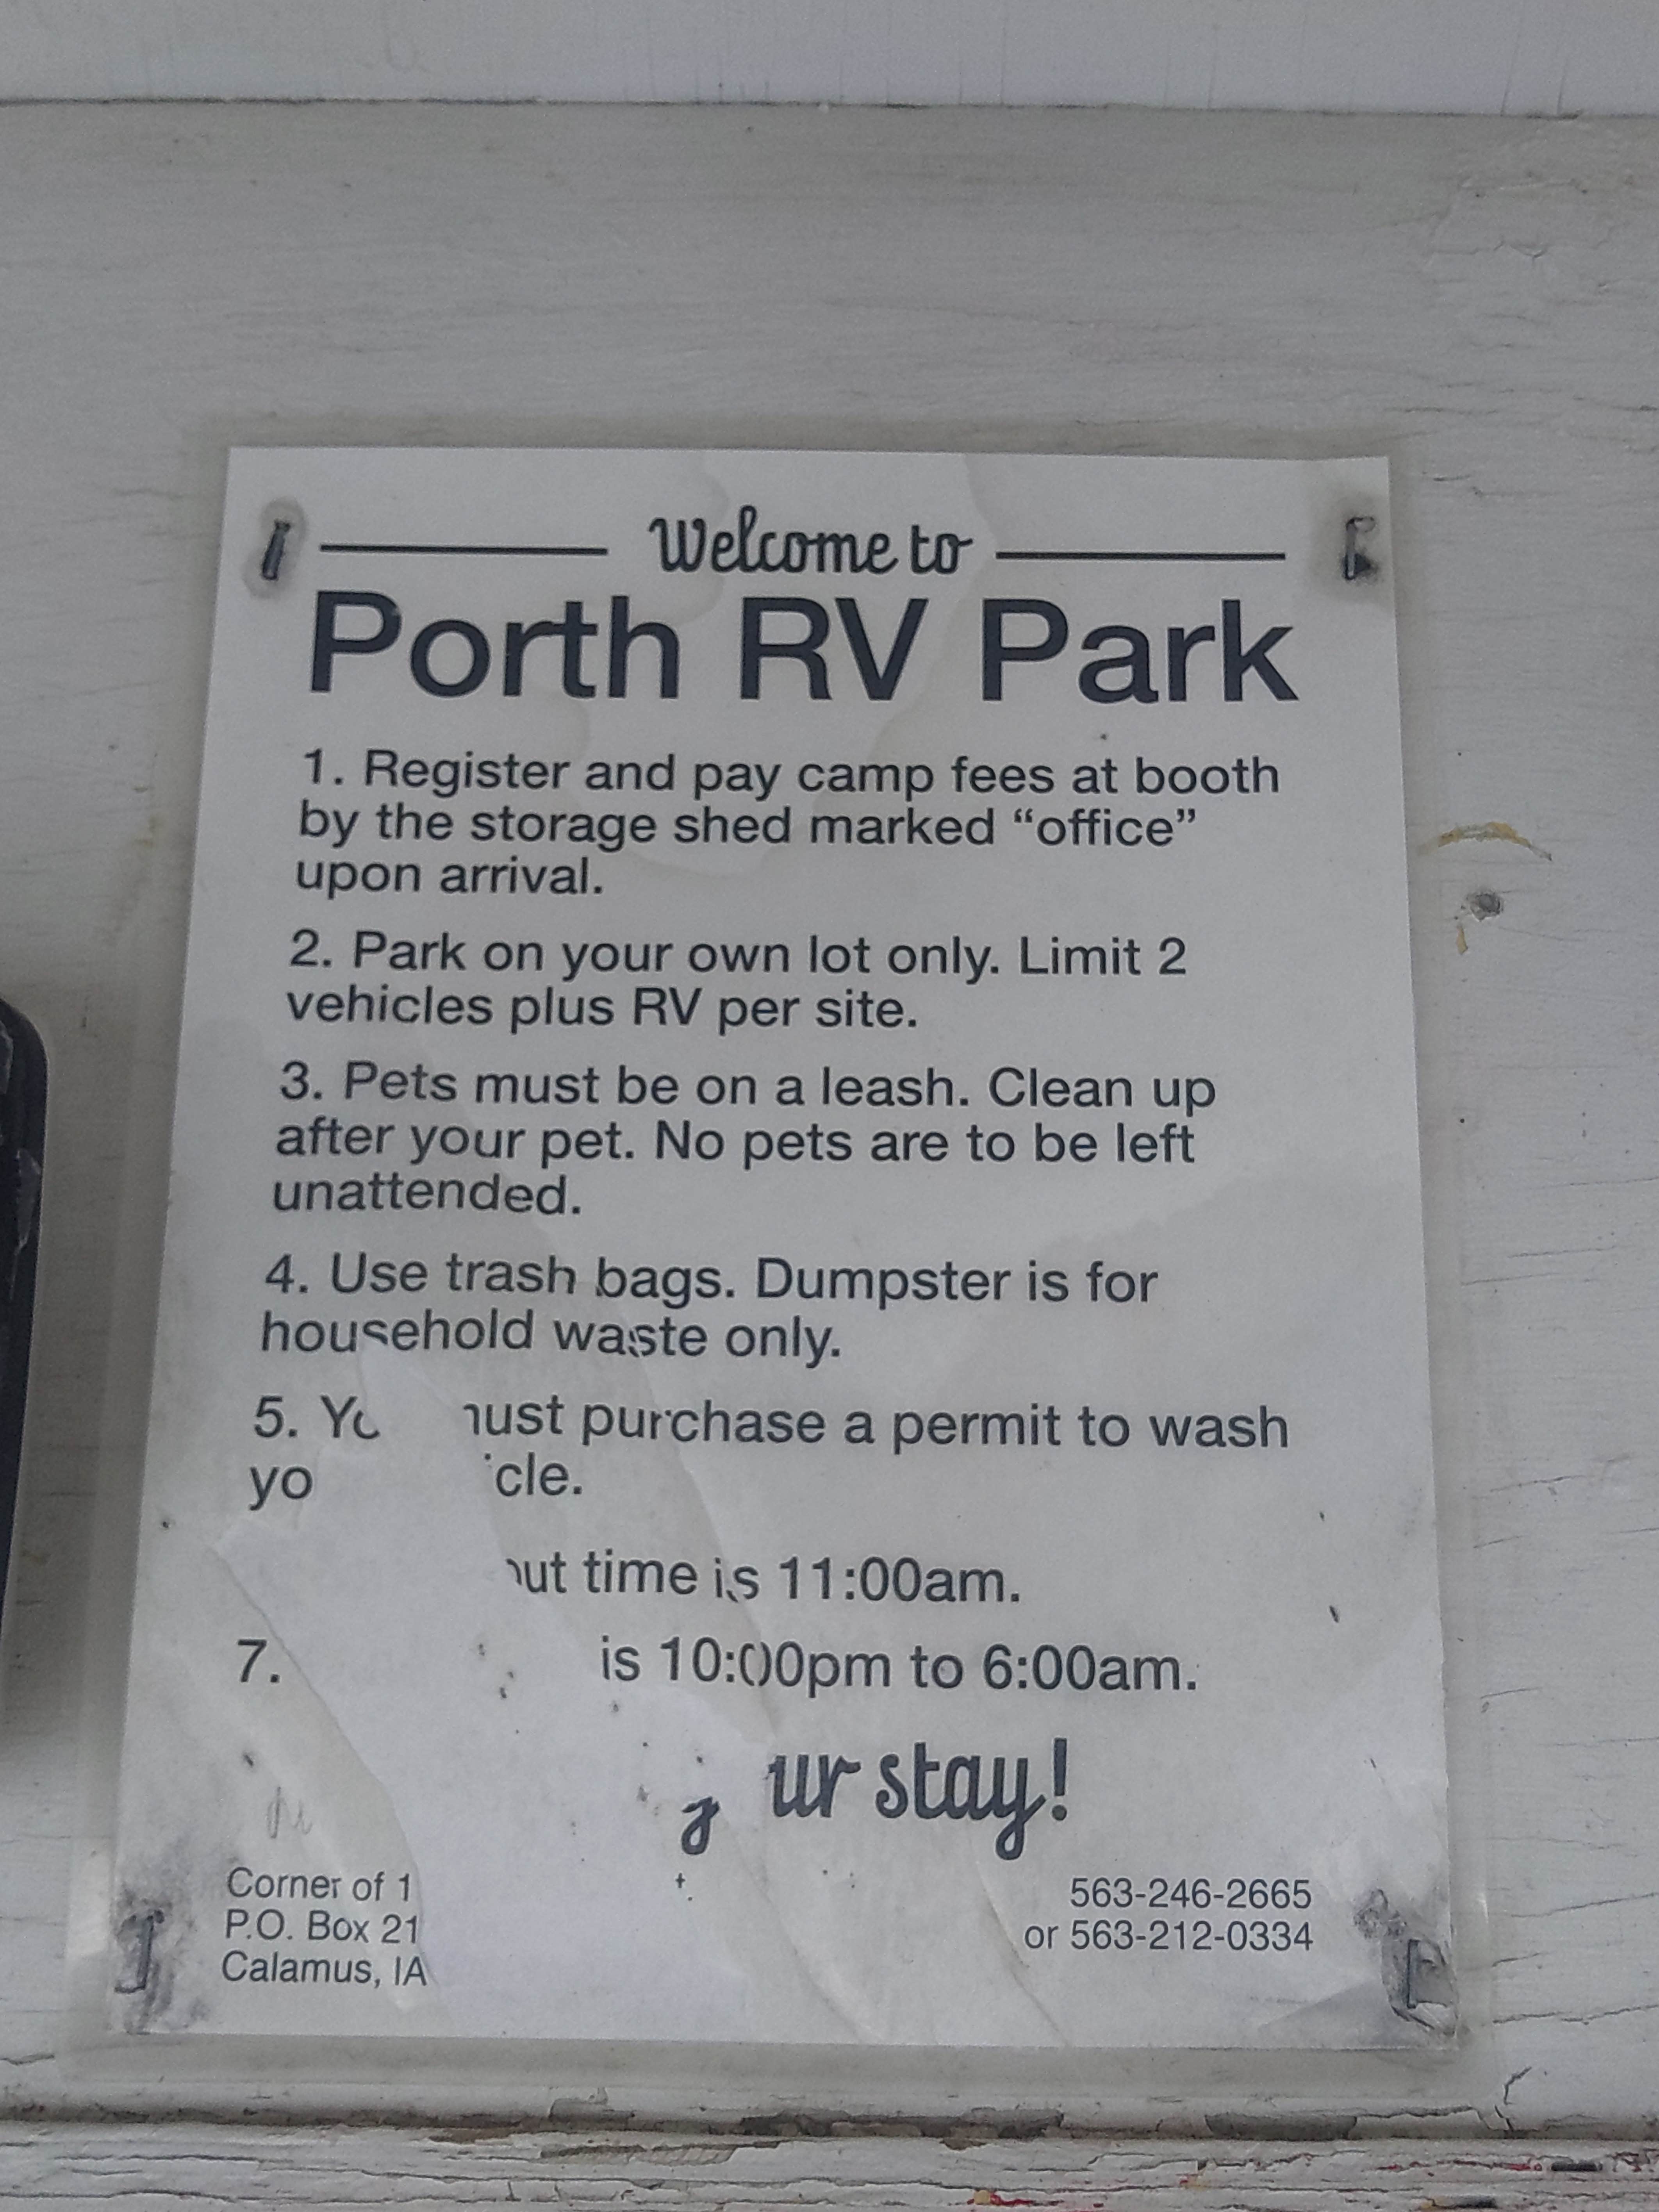 Camper submitted image from Porth RV Park - 5